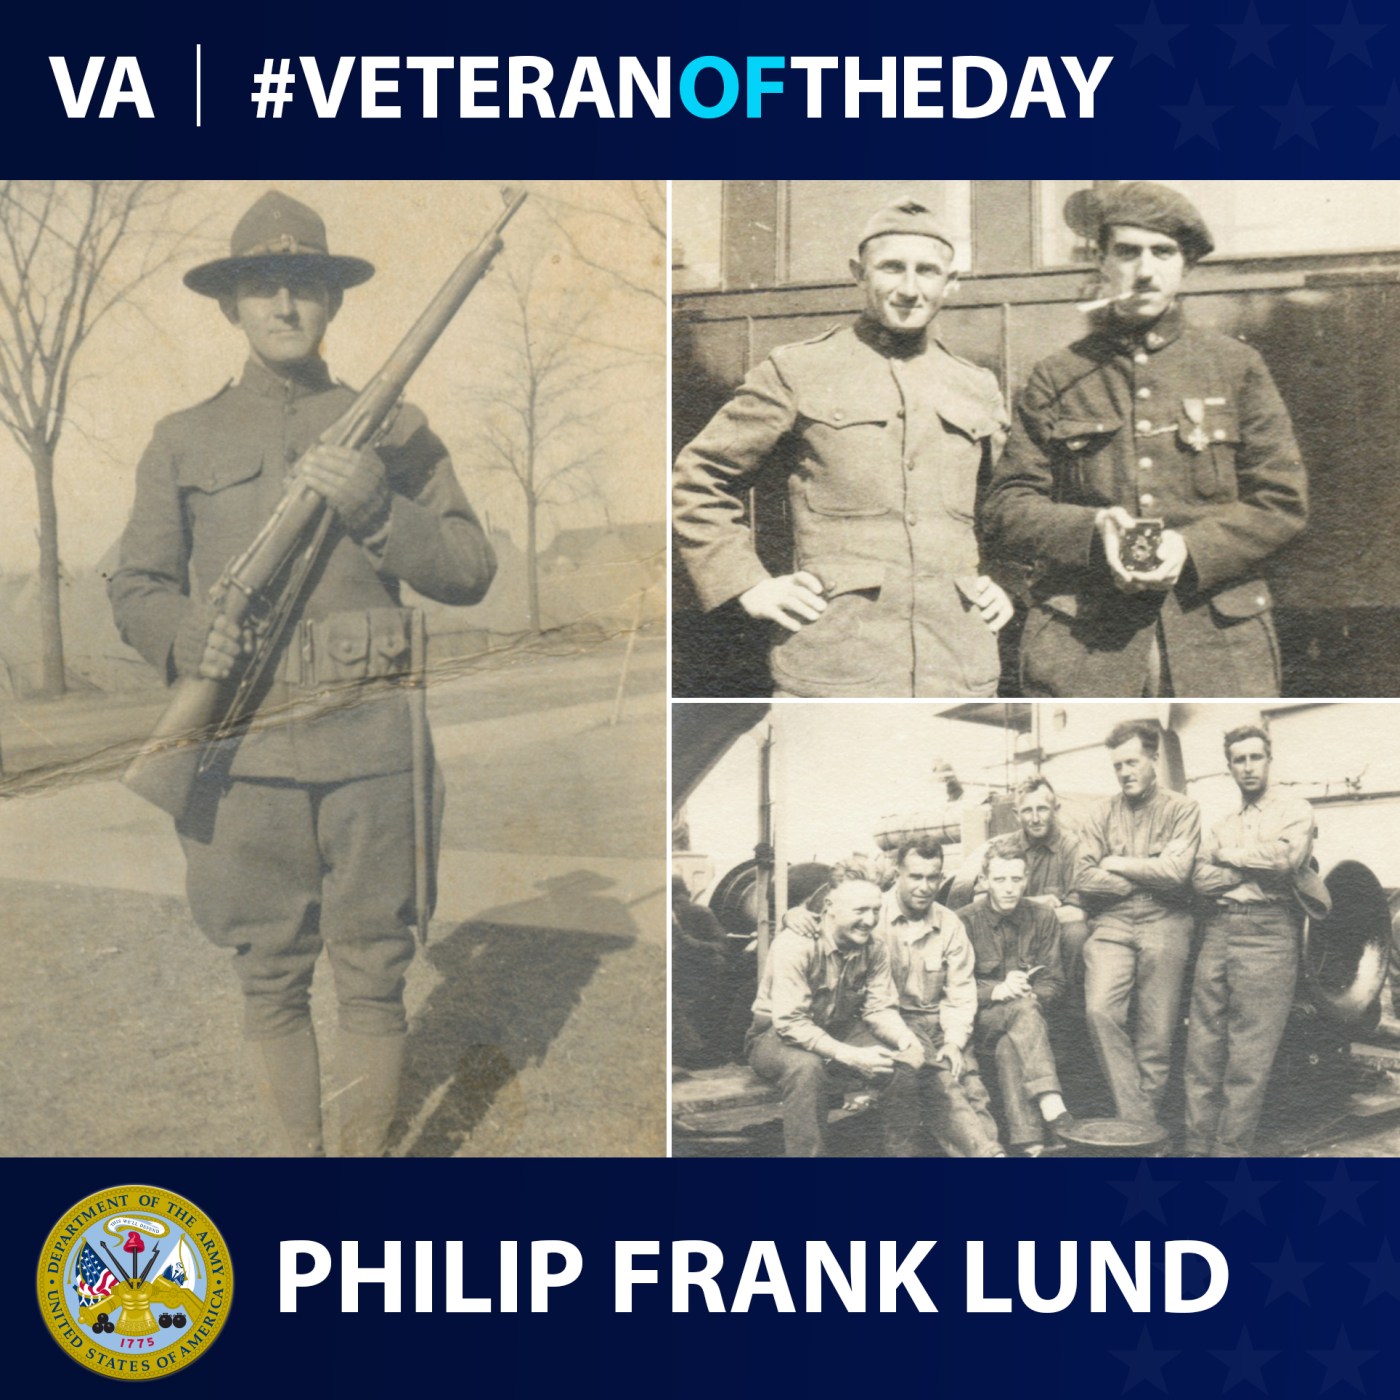 Army Veteran Philip Frank Lund is today's Veteran of the Day.